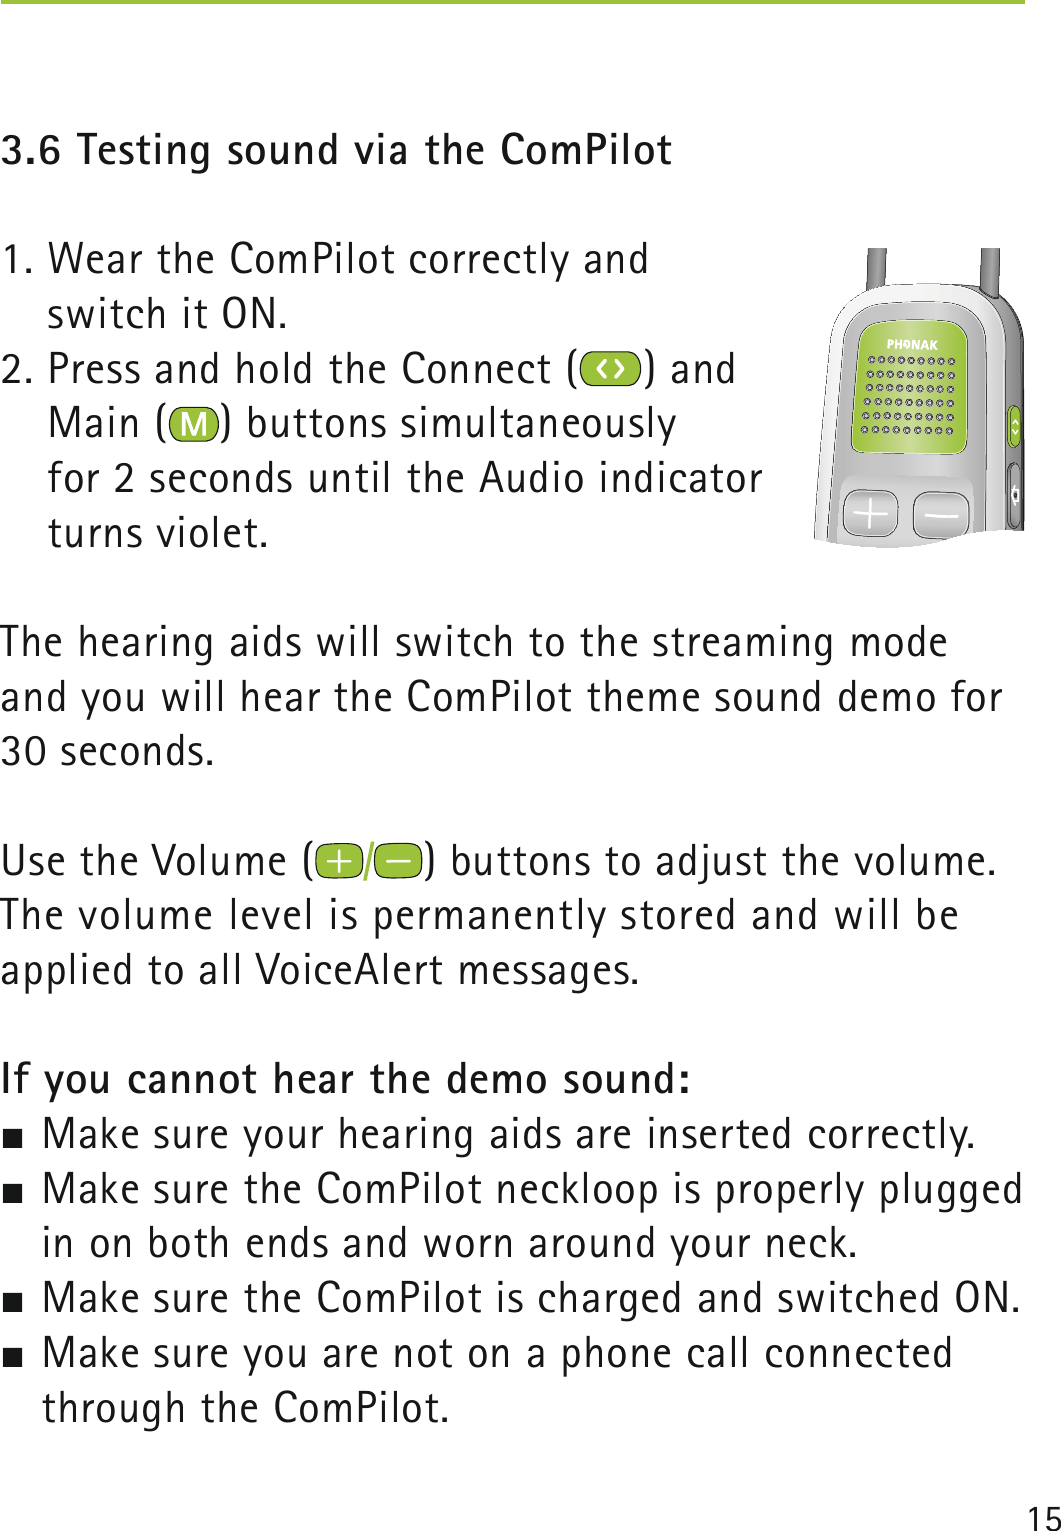 153.6 Testing sound via the ComPilot1. Wear the ComPilot correctly and  switch it ON.2. Press and hold the Connect ( ) and  Main ( ) buttons simultaneously  for 2 seconds until the Audio indicator  turns violet.The hearing aids will switch to the streaming mode and you will hear the ComPilot theme sound demo for 30 seconds.Use the Volume ( ) buttons to adjust the volume.The volume level is permanently stored and will be  applied to all VoiceAlert messages.If you cannot hear the demo sound: Make sure your hearing aids are inserted correctly. Make sure the ComPilot neckloop is properly plugged in on both ends and worn around your neck. Make sure the ComPilot is charged and switched ON. Make sure you are not on a phone call connected through the ComPilot. 